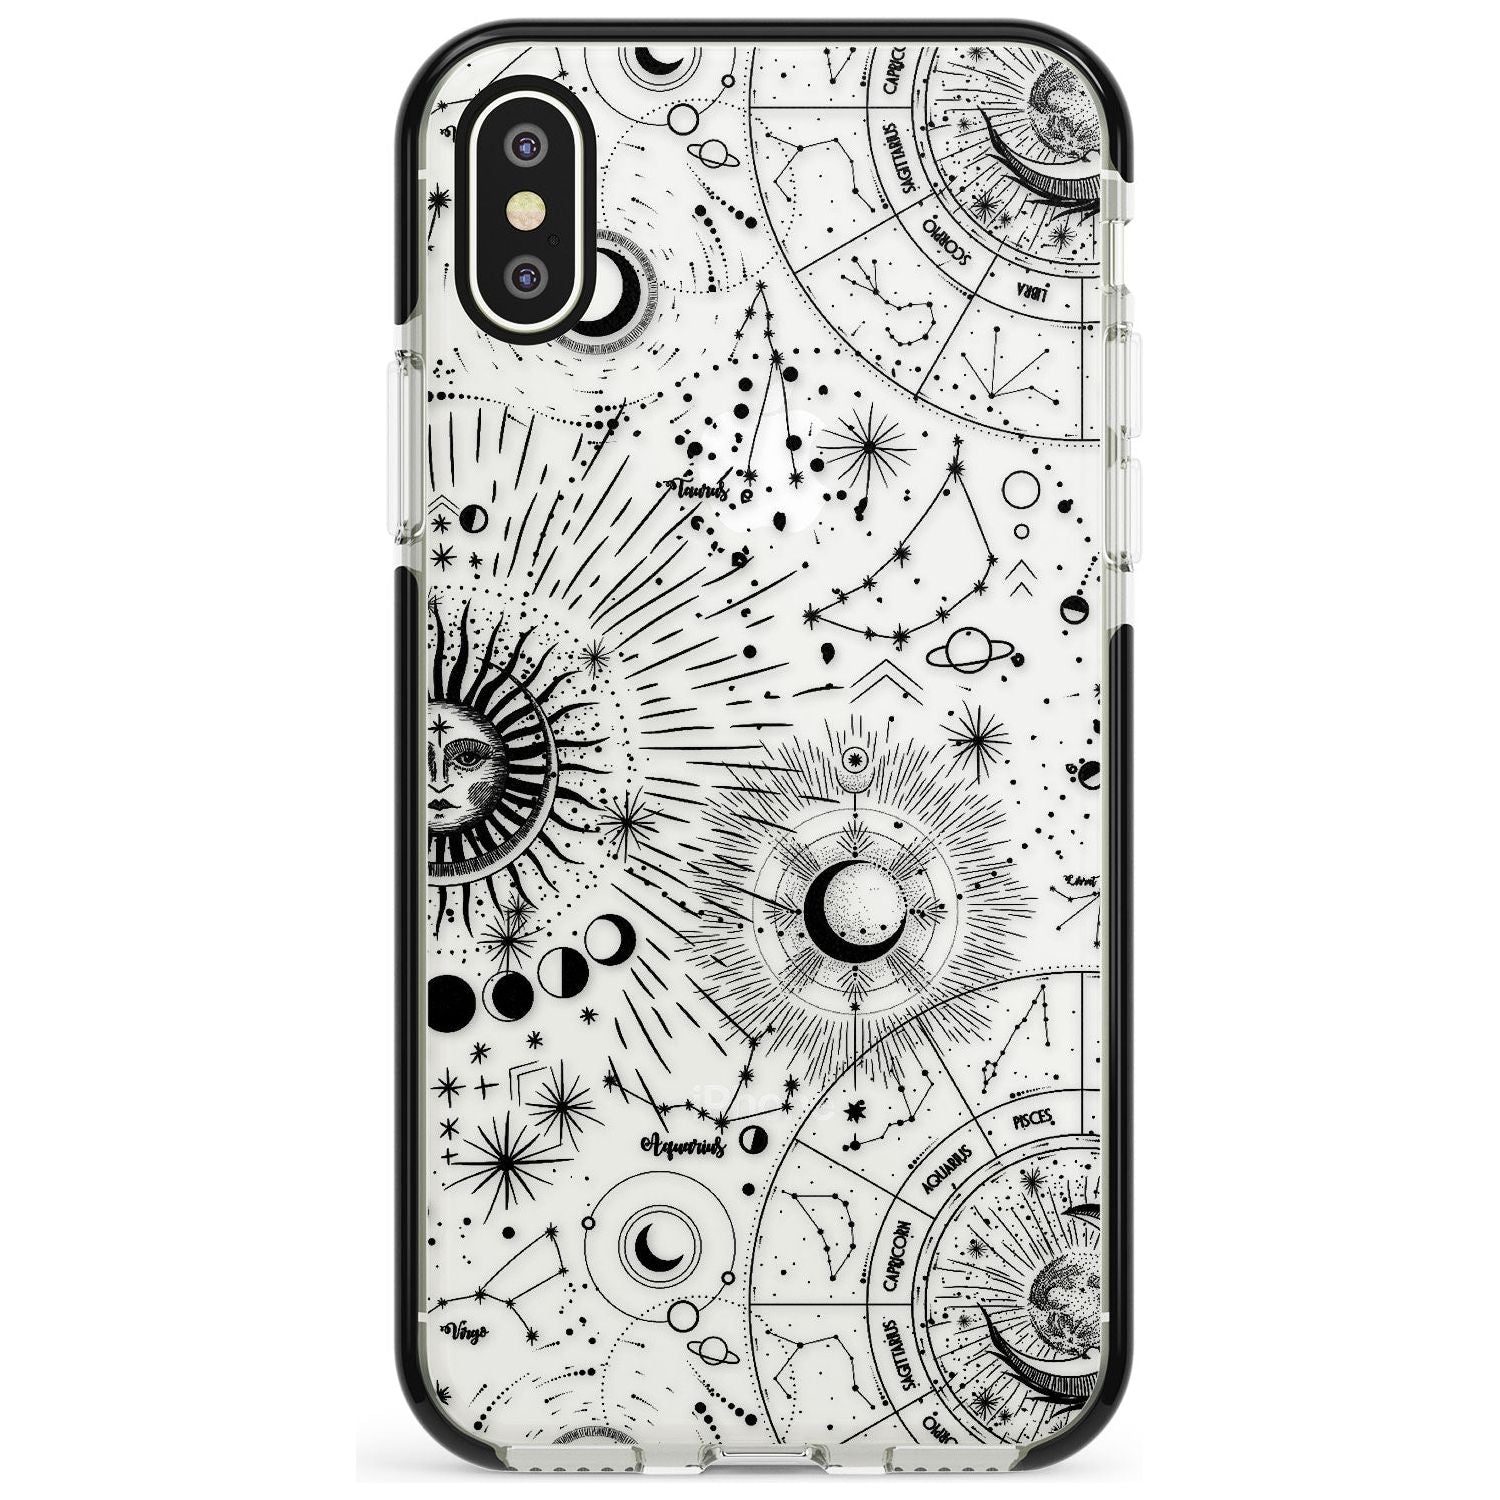 Suns & Constellations Astrological Black Impact Phone Case for iPhone X XS Max XR